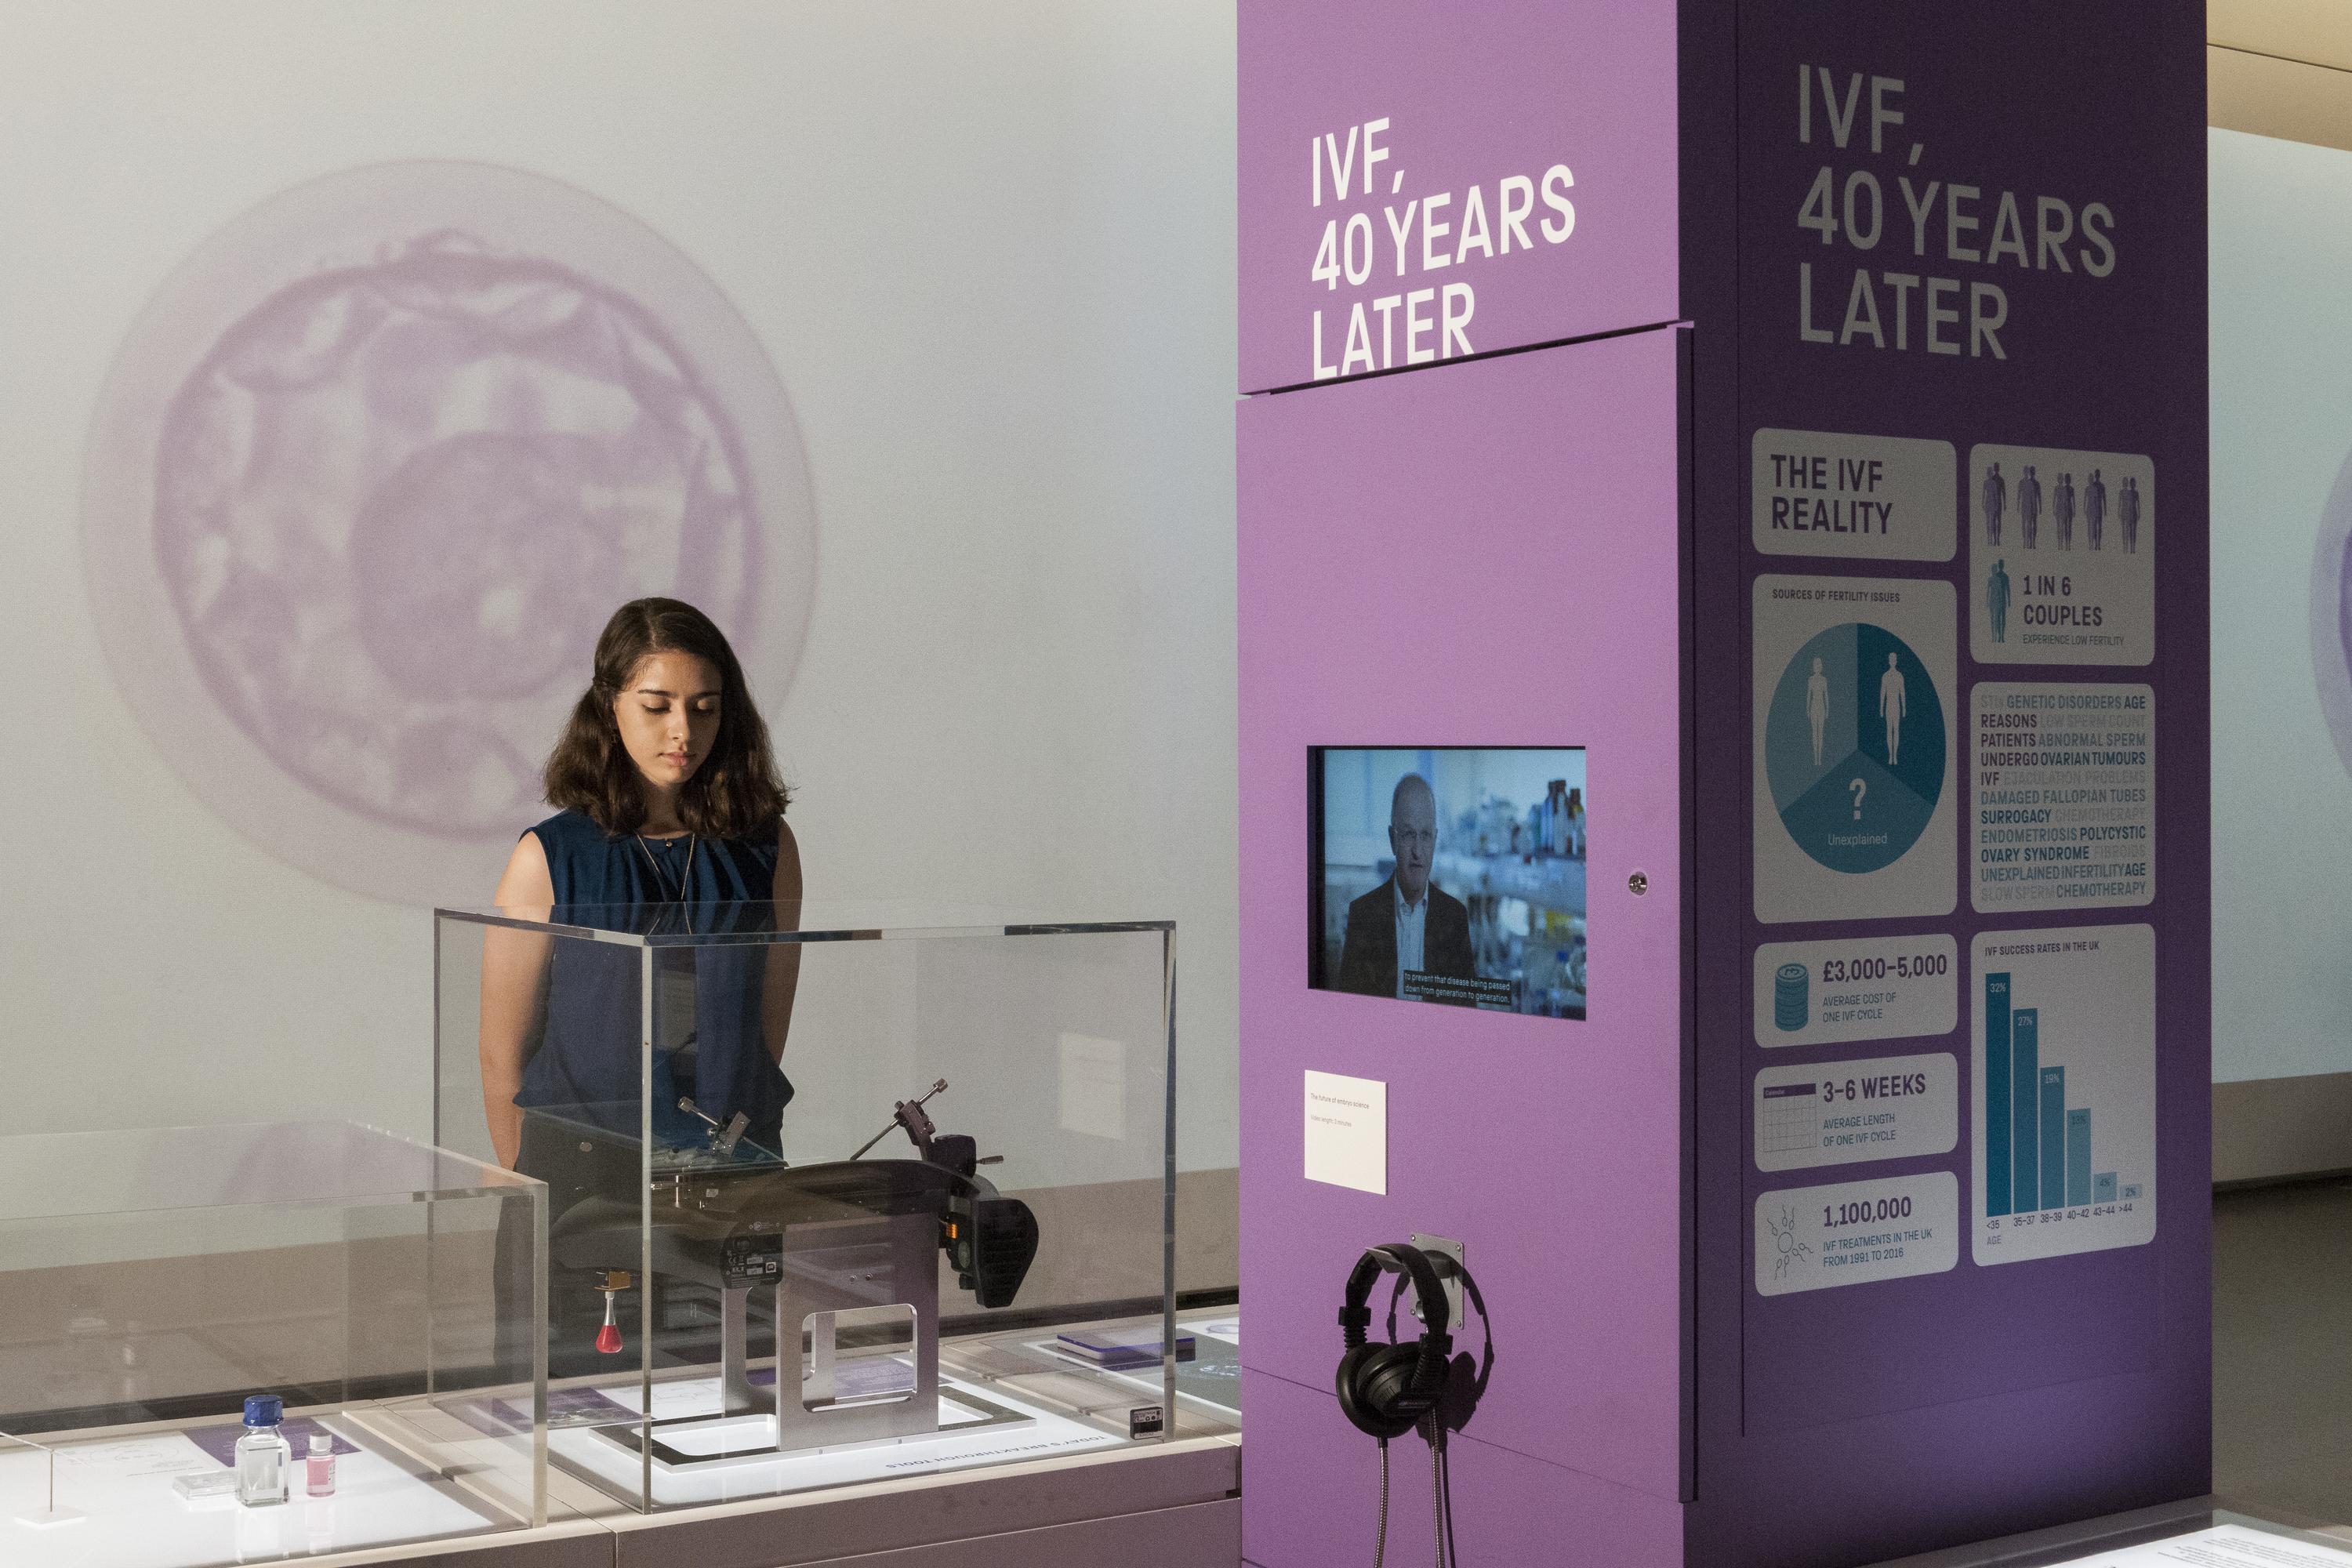 A woman examines a piece of medical equipment on display at the Science Museum's exhibition. Next to here is a column displaying various statistics with the title 'IVF, 40 years later'